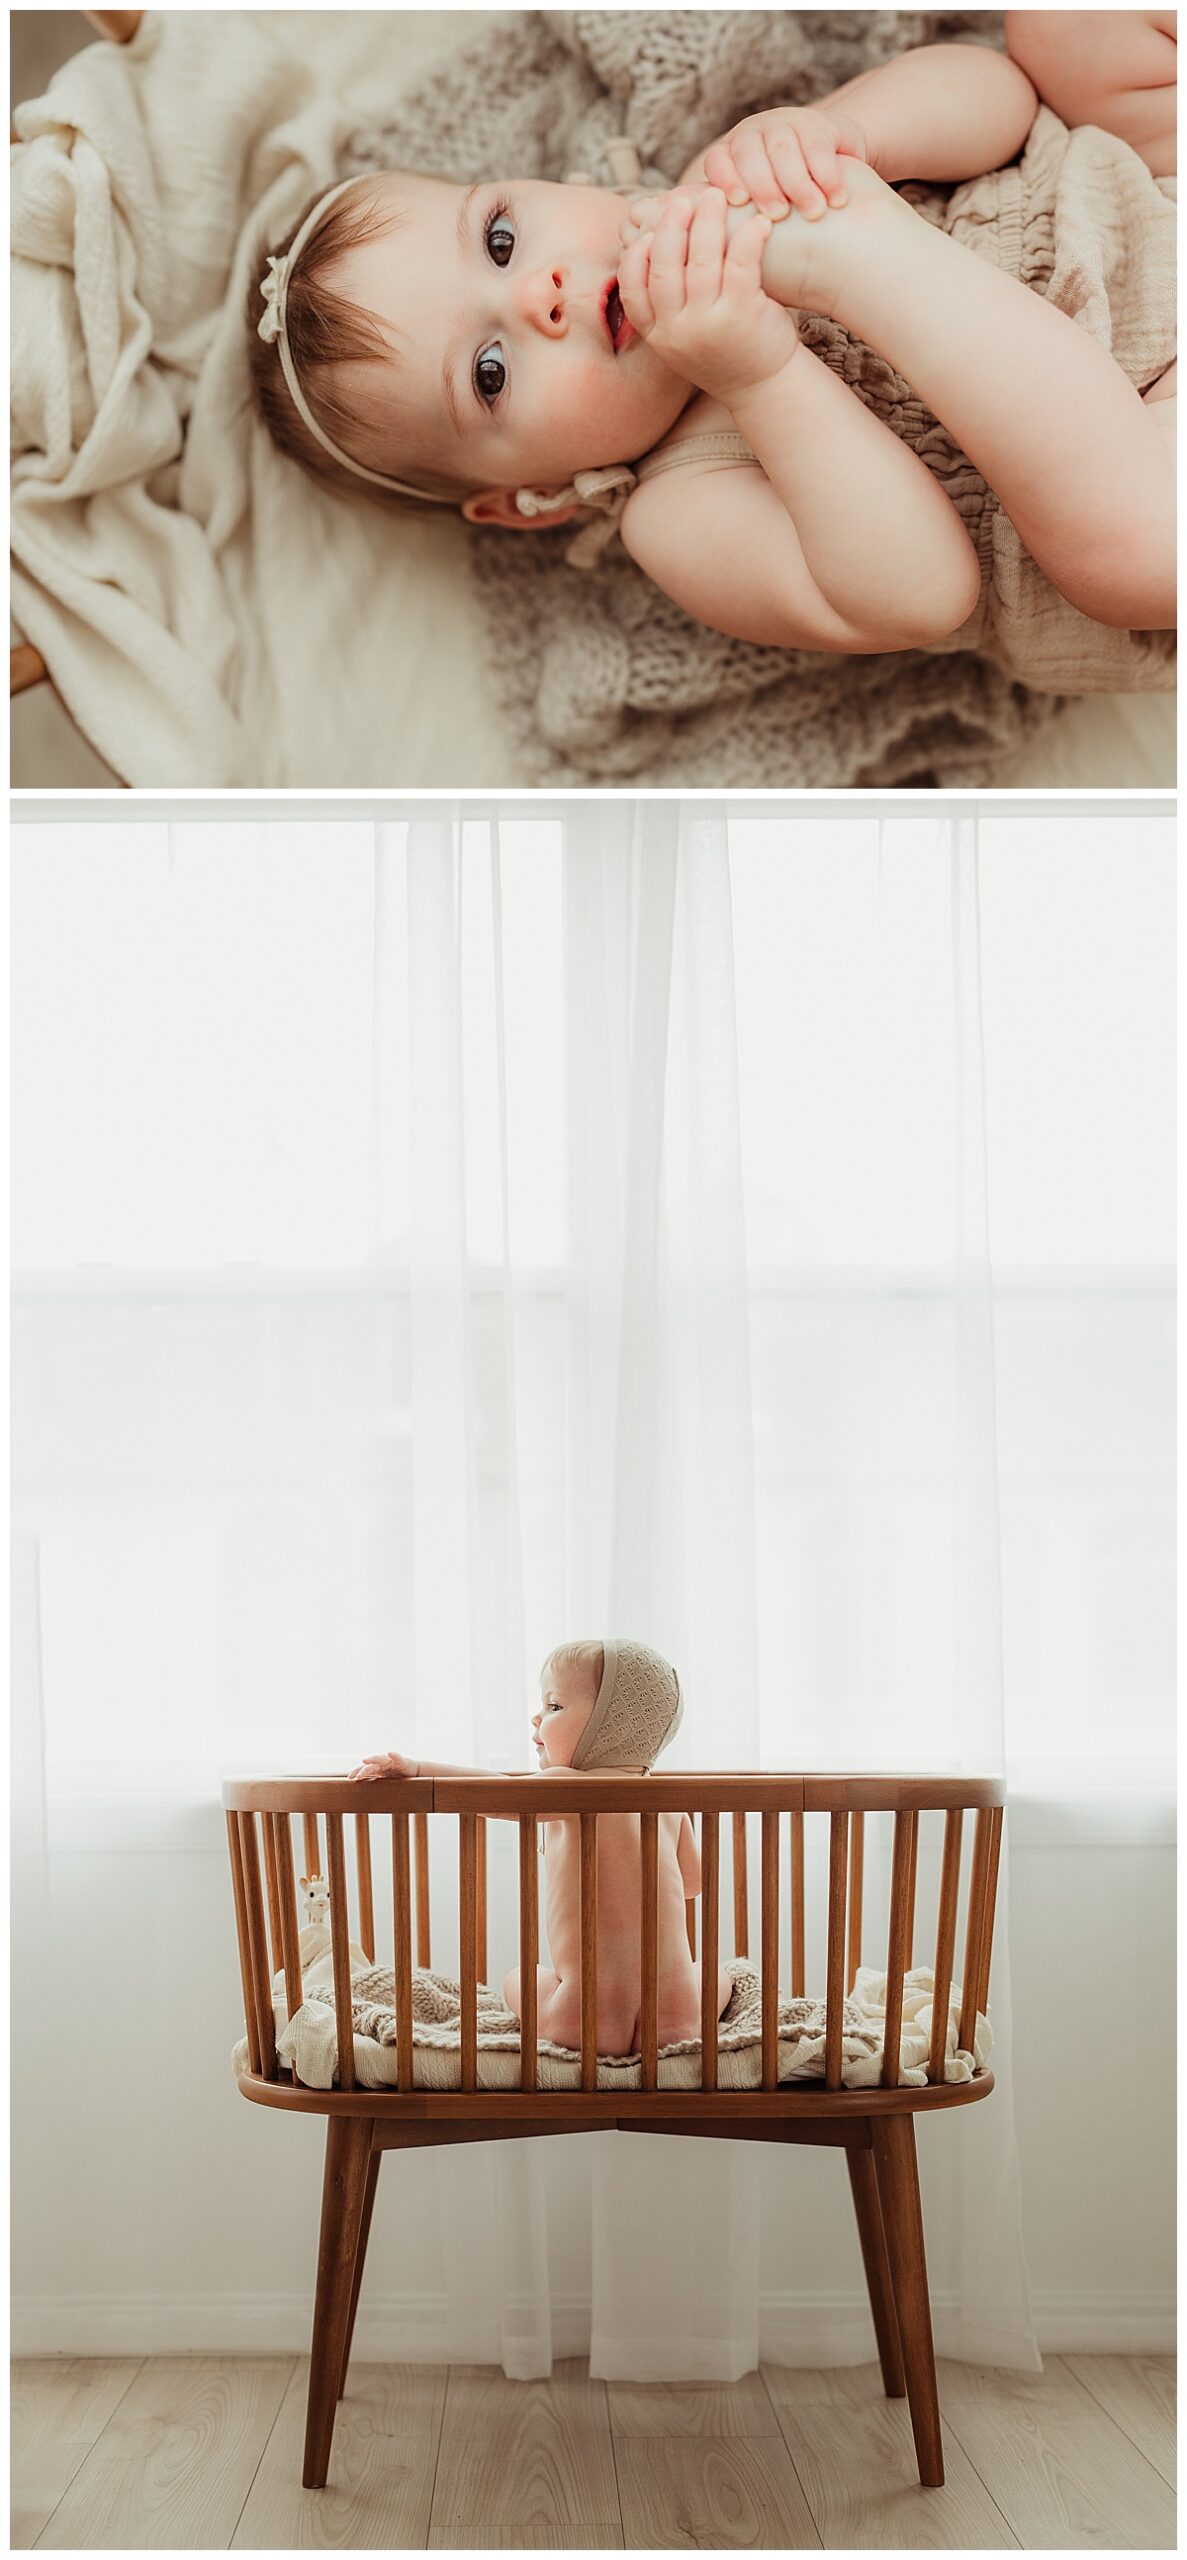 Baby sits and stands up in the crib for Norma Fayak Photography